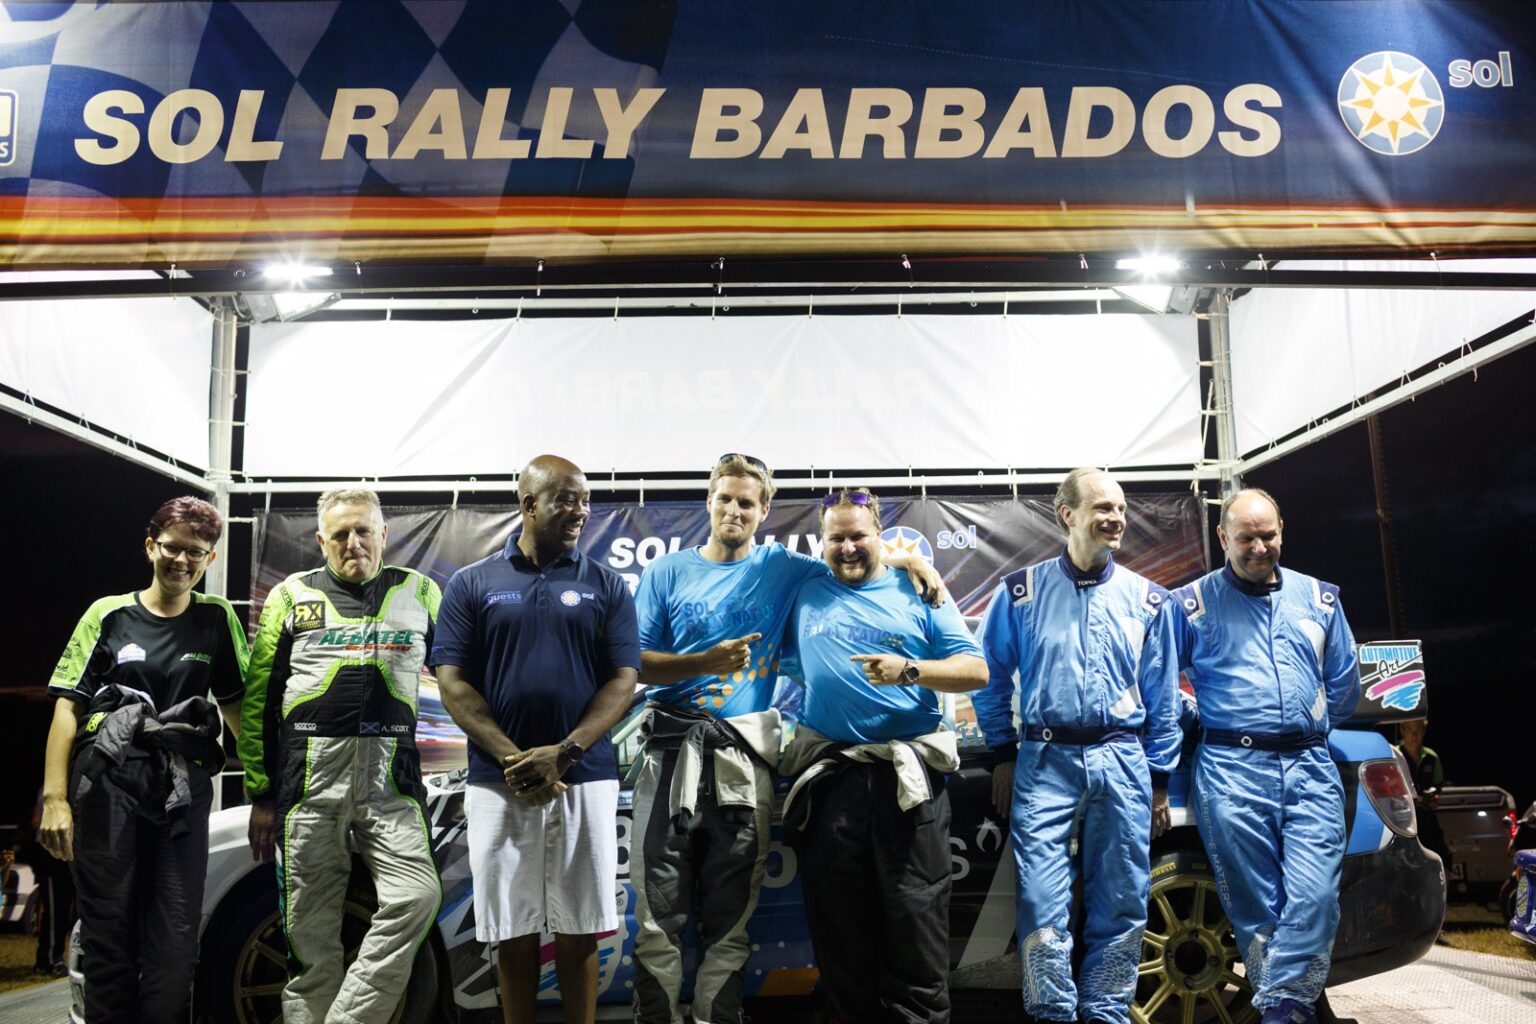 Spectacular! 2022 Sol Rally Barbados Is Back.